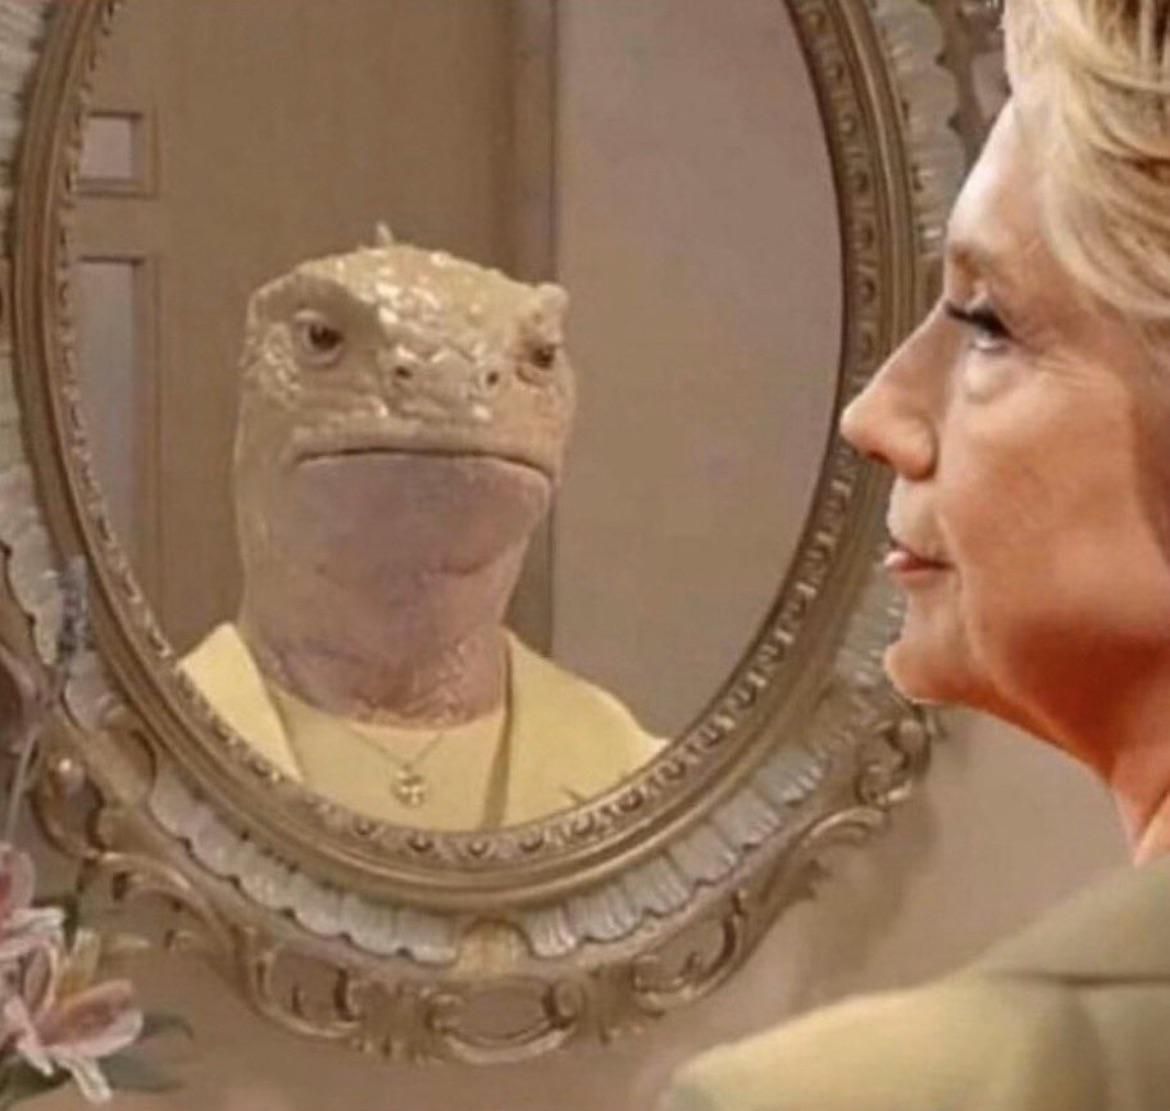 Hillary Clinton prepares to give her Presidential Concession Speech,